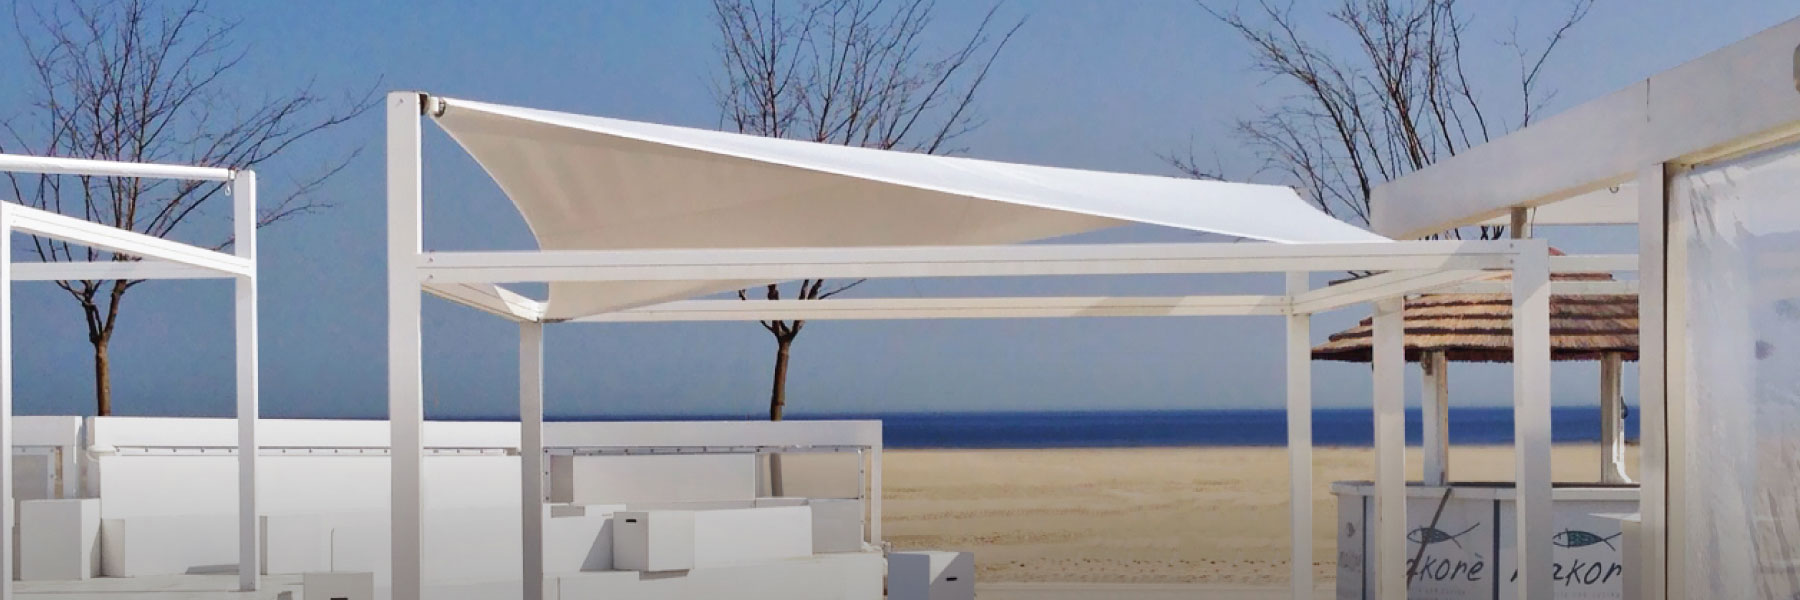 PVC FABRIC SHADE SAIL FOR BARS, CLUBS AND VENUES